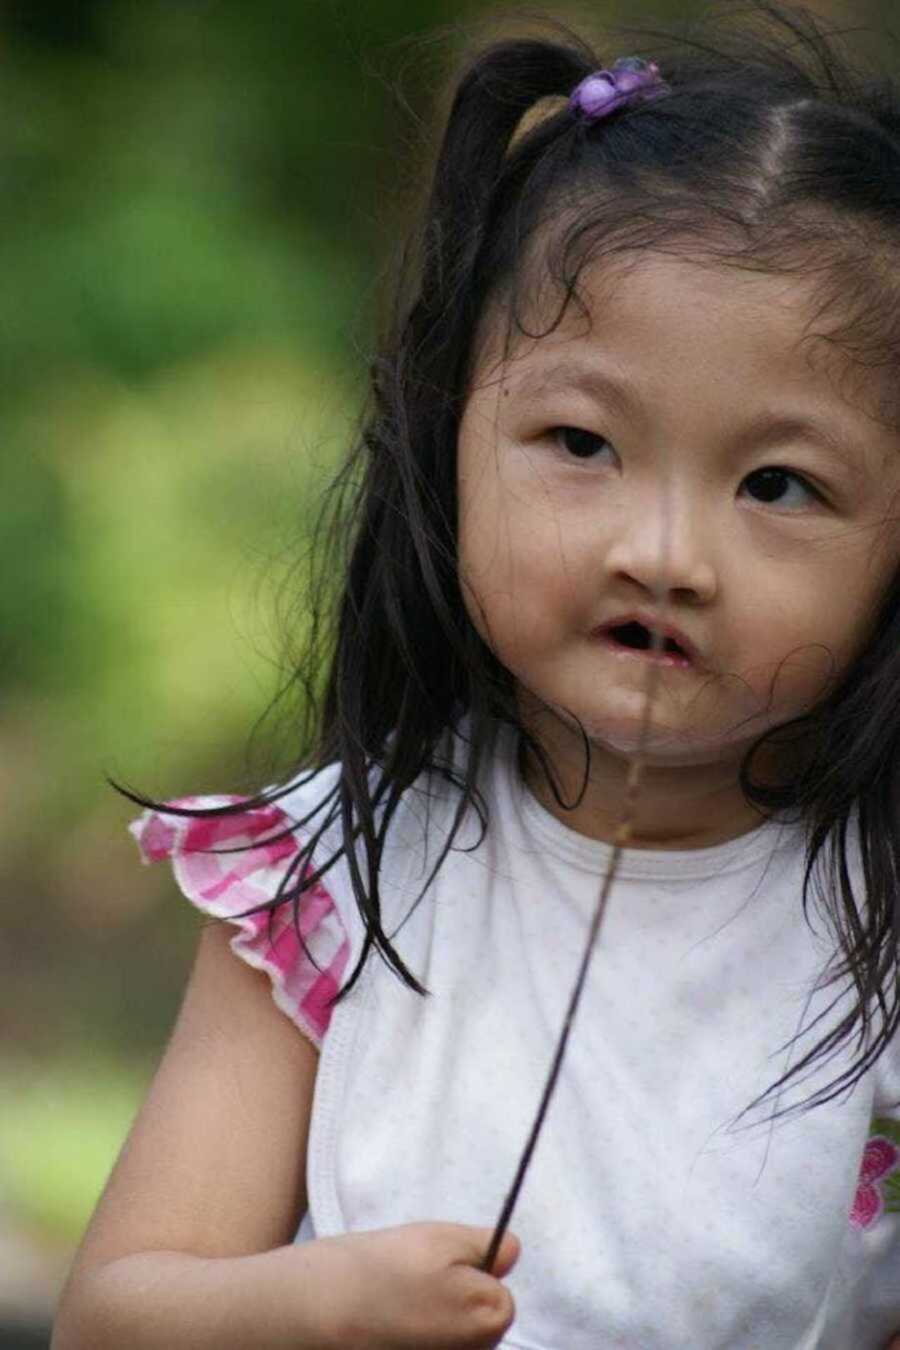 Girl with limb difference playing with stick